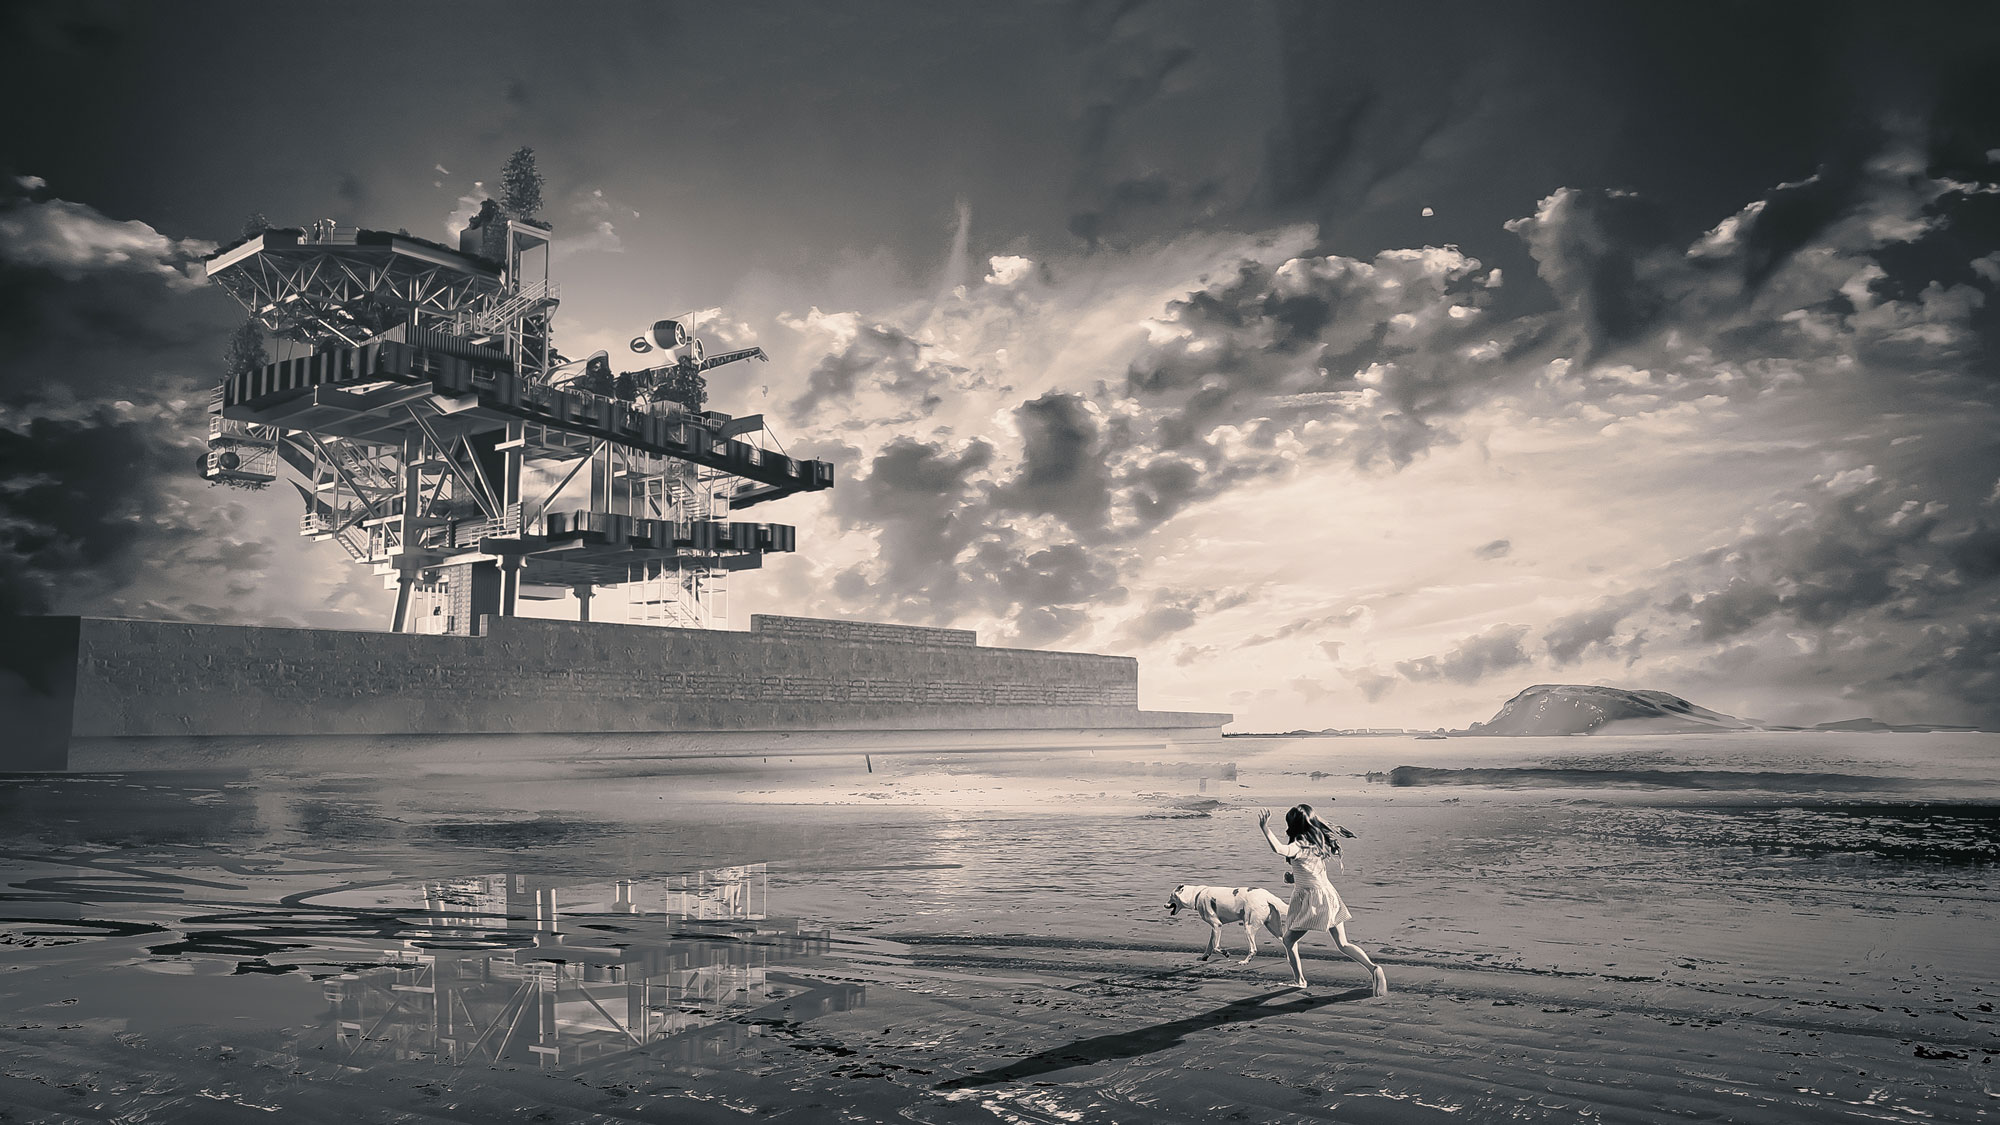 A moody black and white render of SEE MONSTER, rising up over the Tropicana's sea wall. A young girl chases her dog on the beach below.